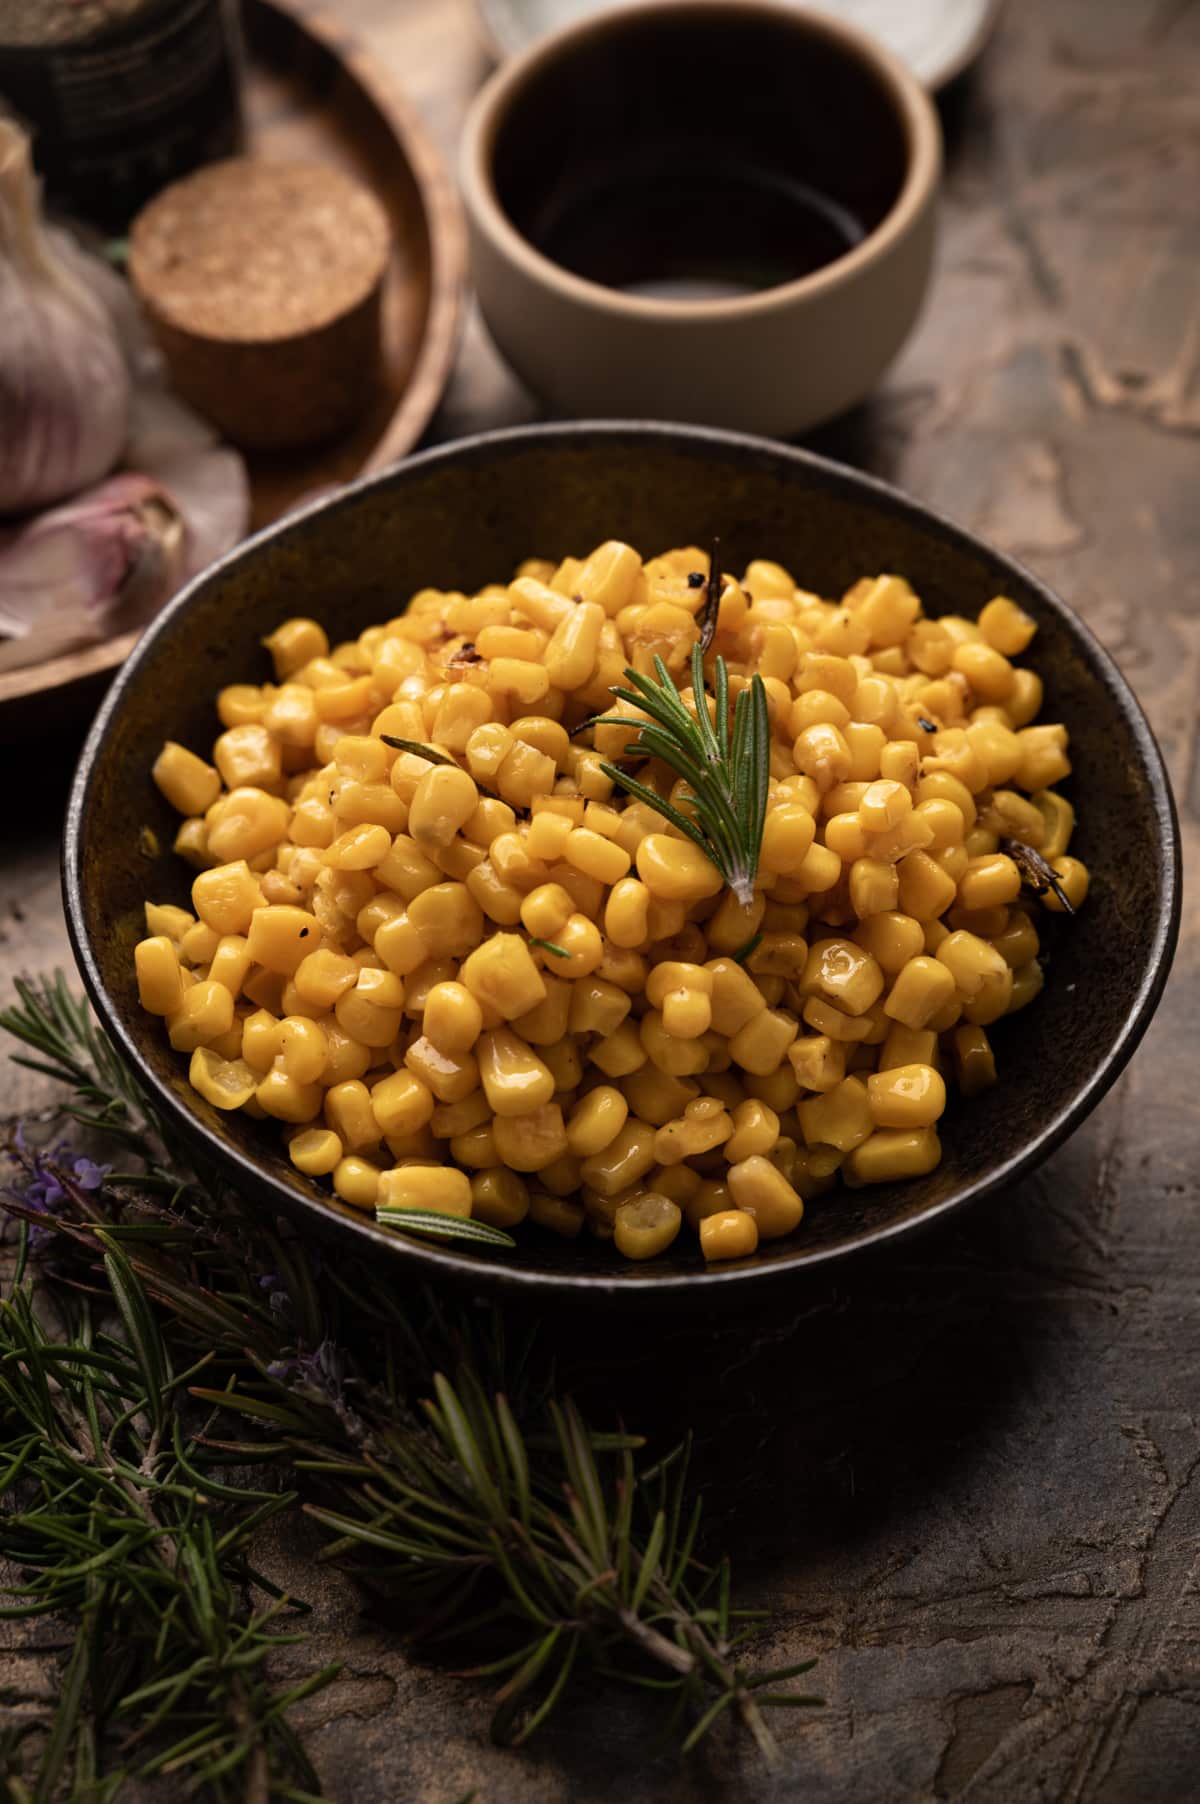 Freshly cooked corn in a bronze ceramic bowl with fresh rosemary sprigs laying nearby.